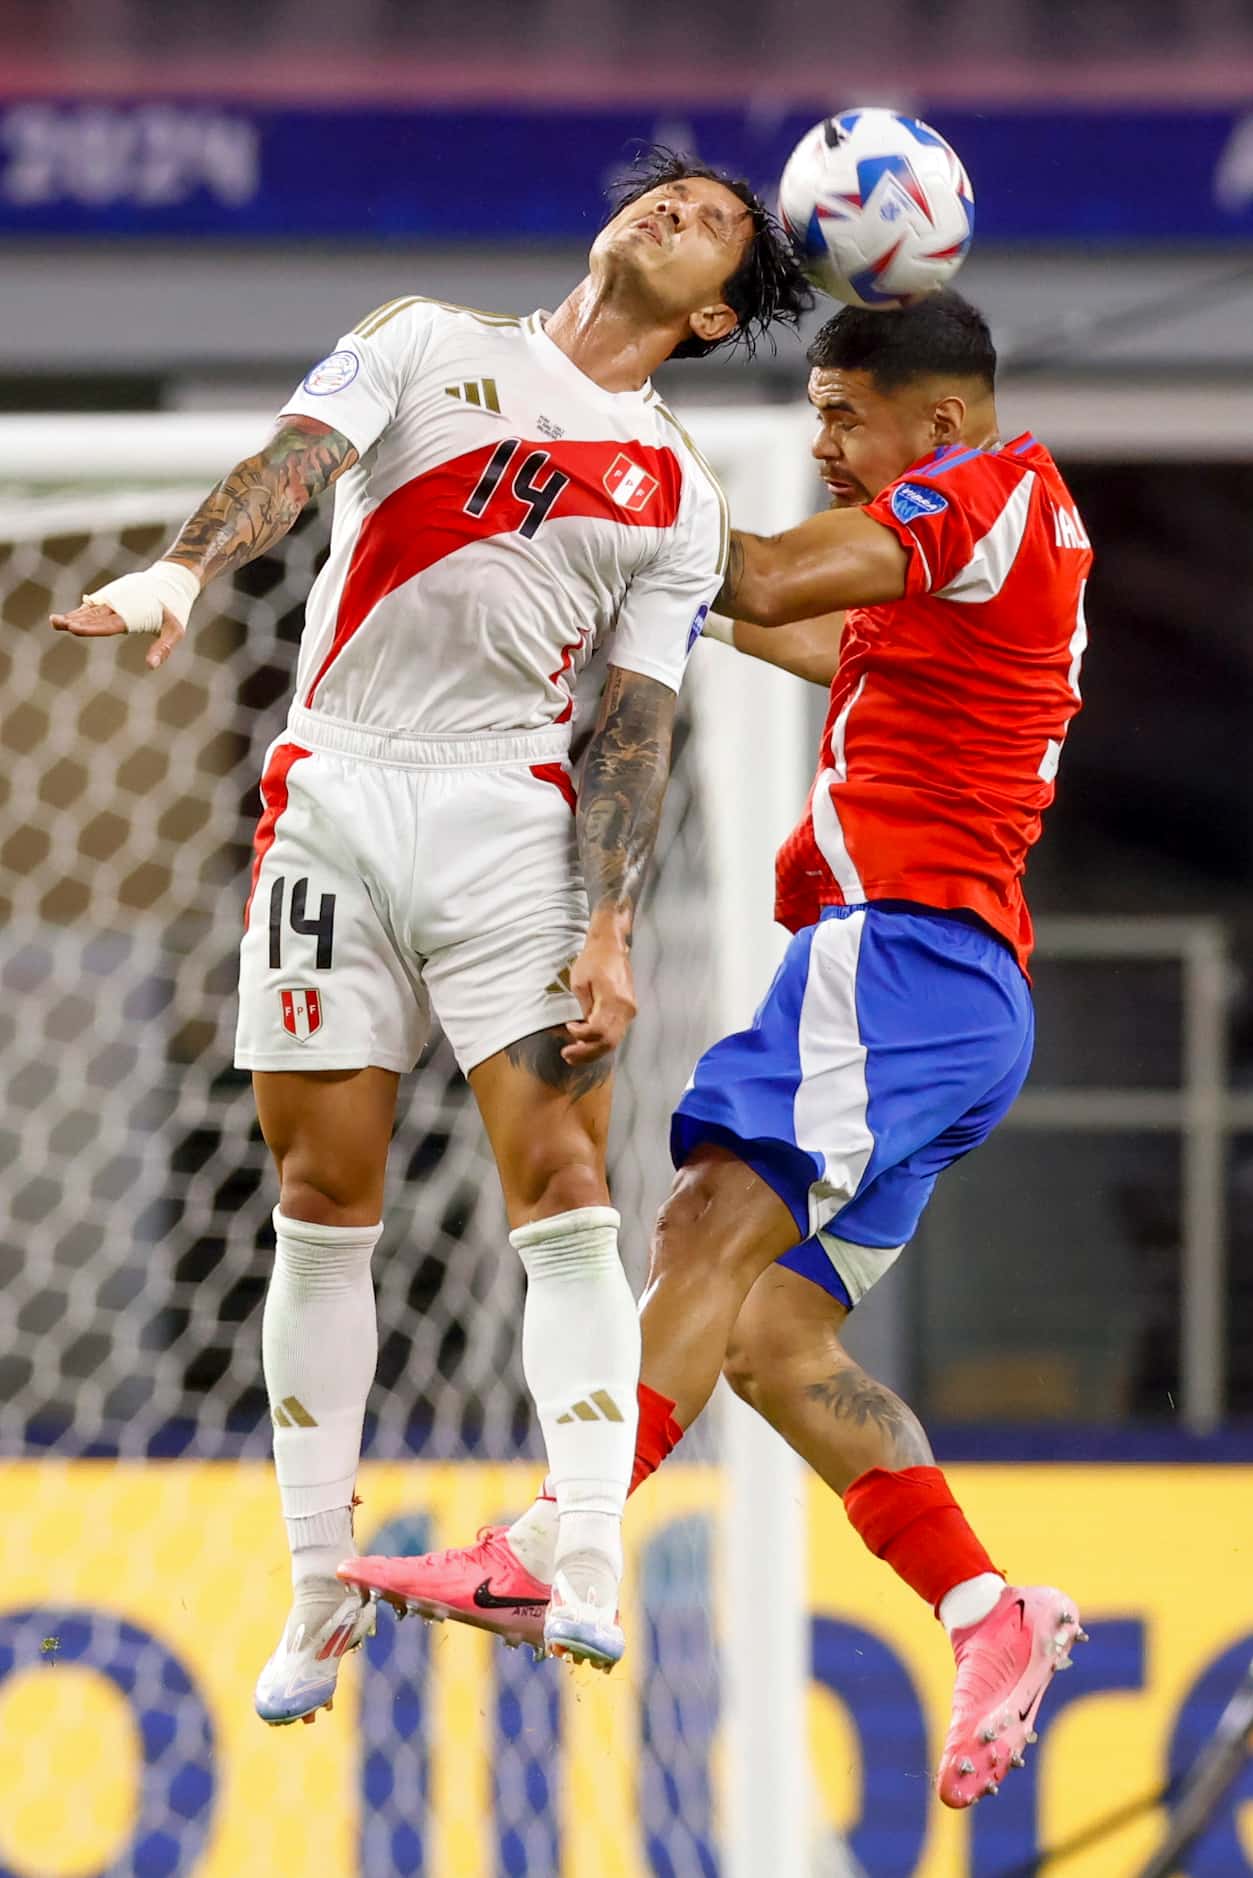 Peru forward Gianluca Lapadula (14) and Chile defender Paulo Díaz (5) jump to head the ball...